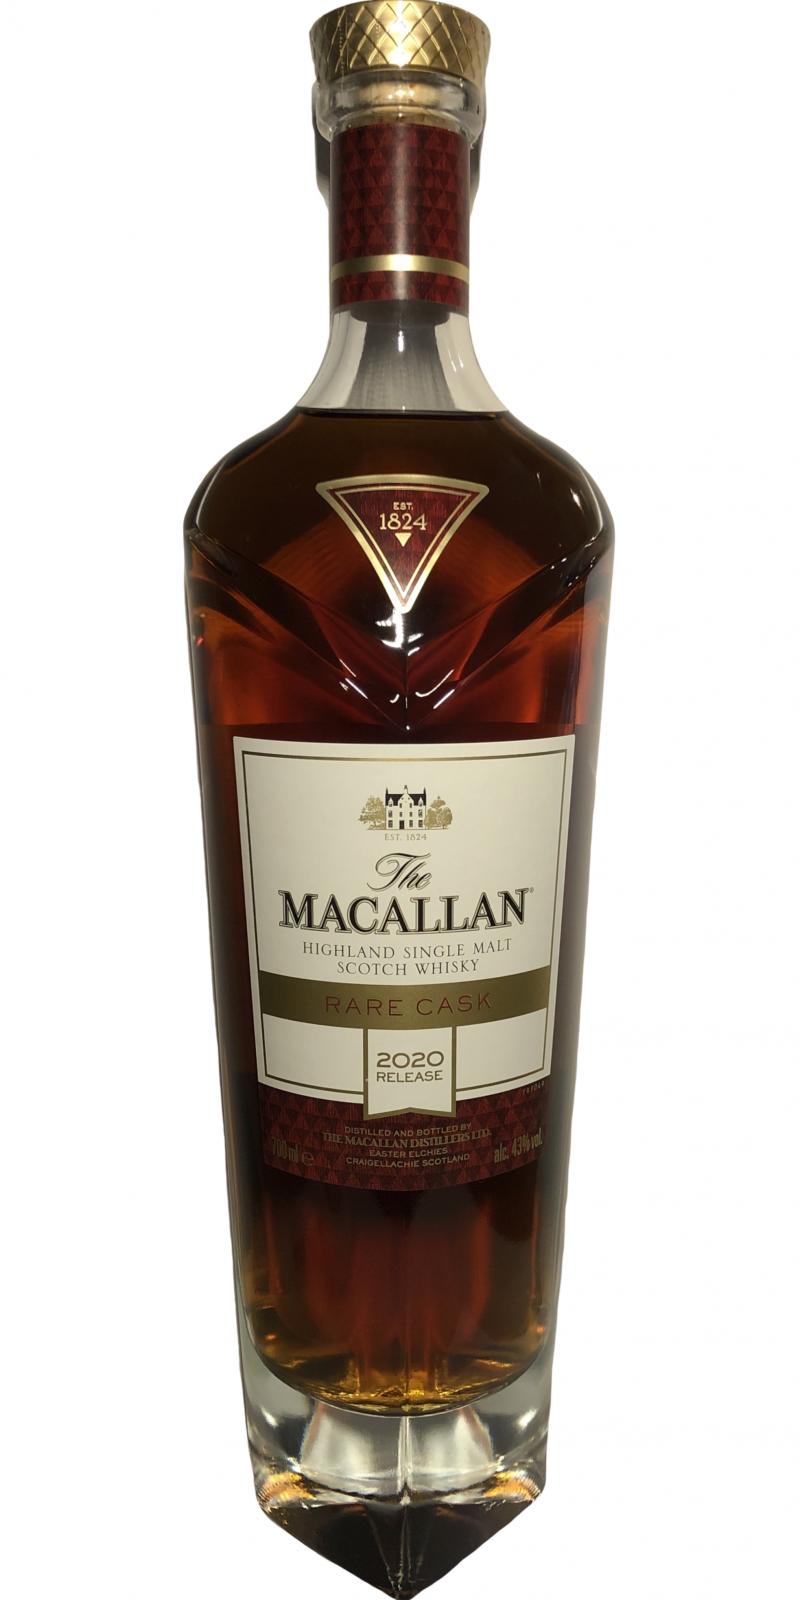 Macallan Rare Cask Ratings And Reviews Whiskybase